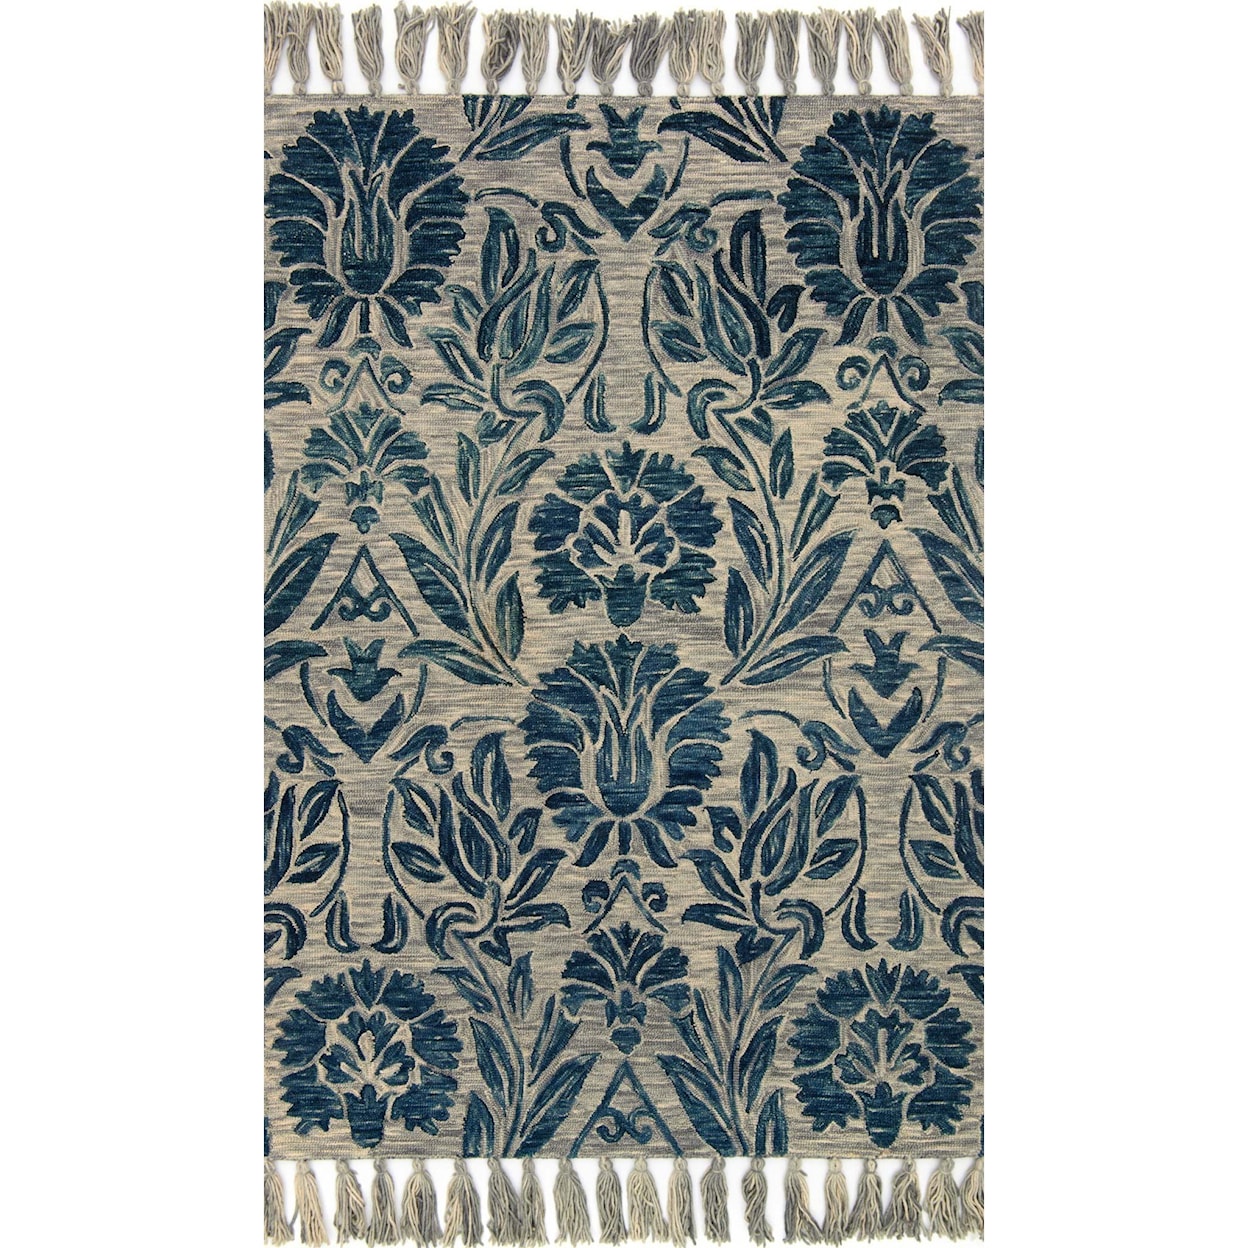 Magnolia Home by Joanna Gaines for Loloi Jozie Day 7' 9" x 9' 9" Rectangle Rug